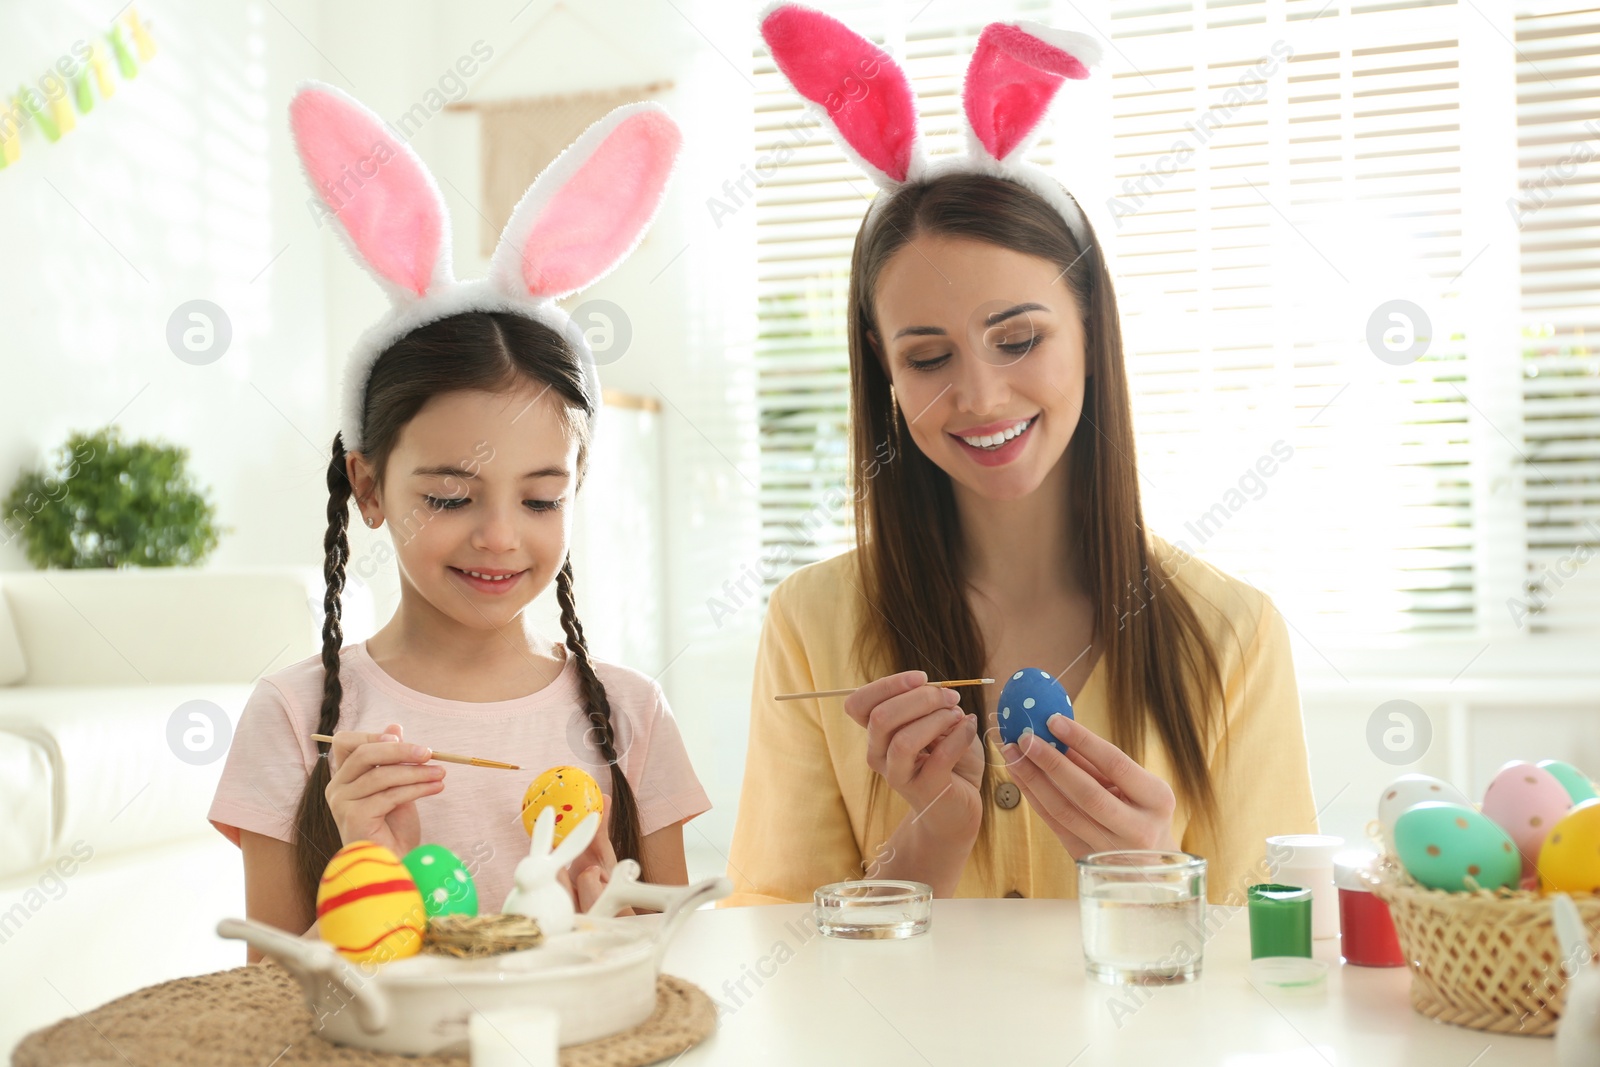 Photo of Happy mother and daughter with bunny ears headbands painting Easter eggs at home